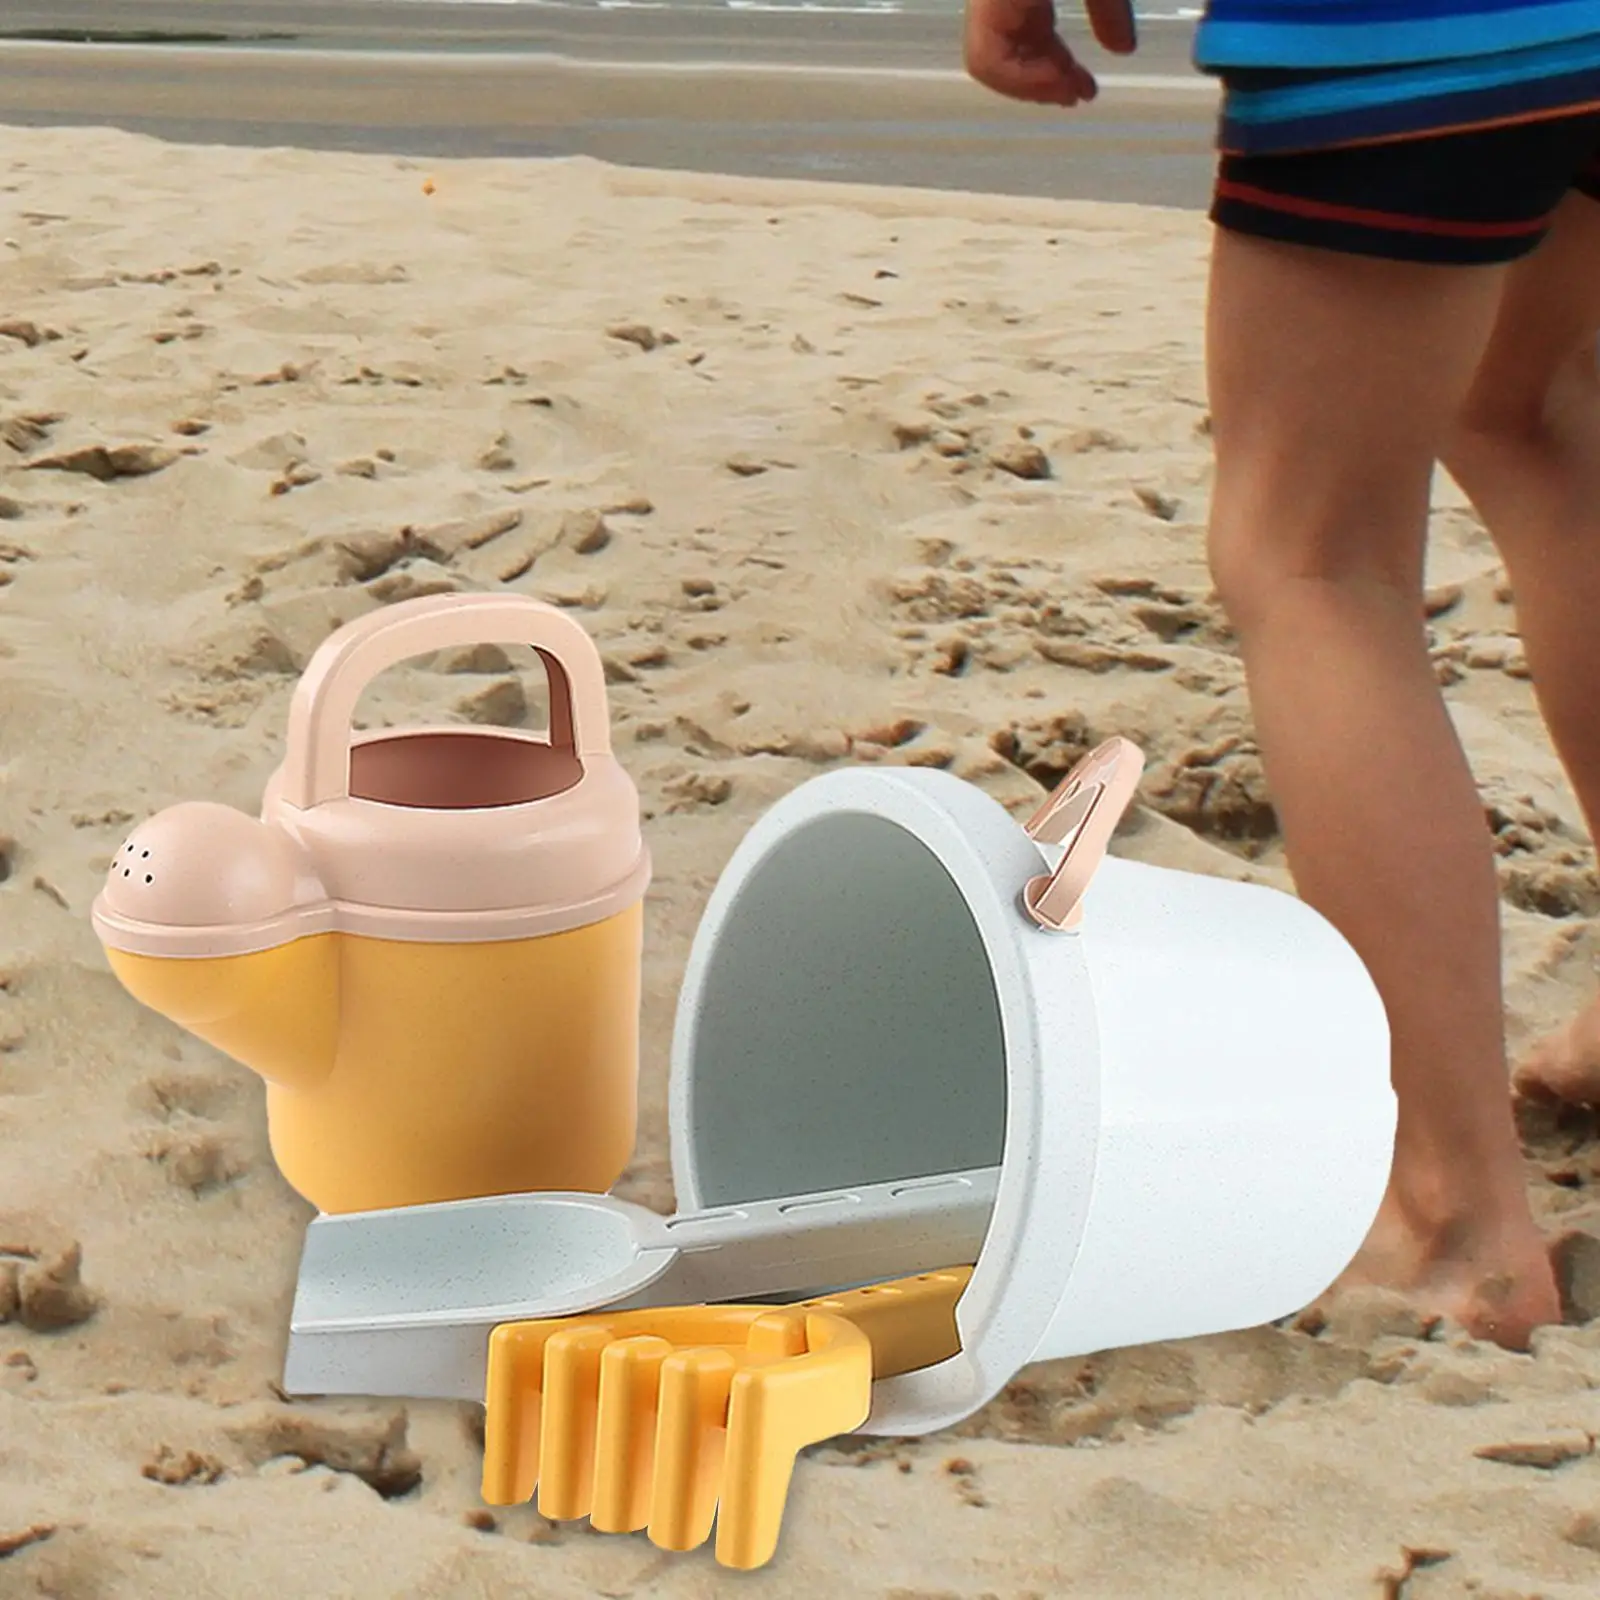 Outdoor Beach Toys Beach Seaside Tools Pool Playset Bucket for Ages 3+ Kids